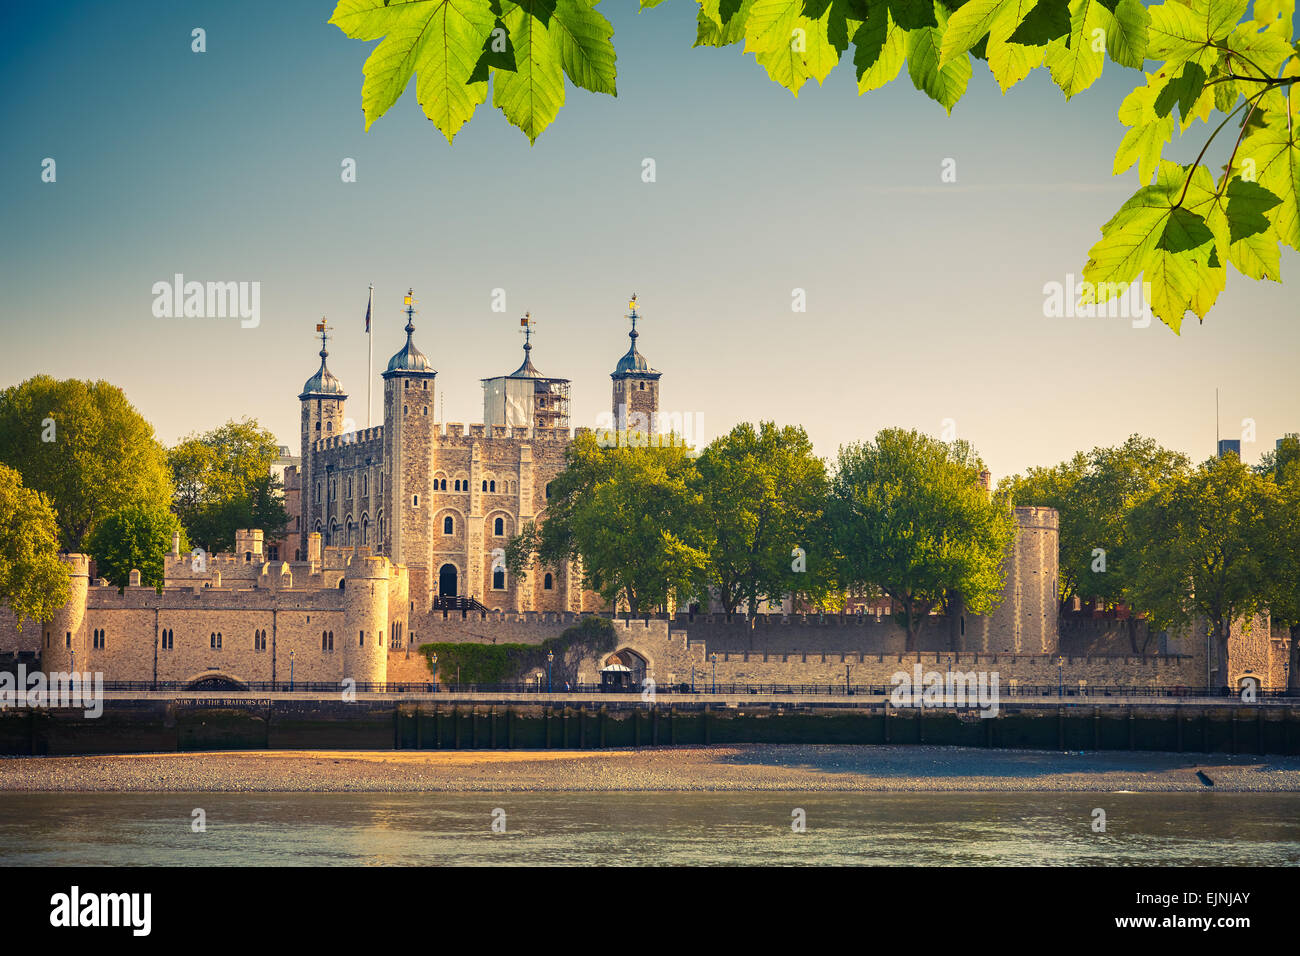 Tower of London Stock Photo